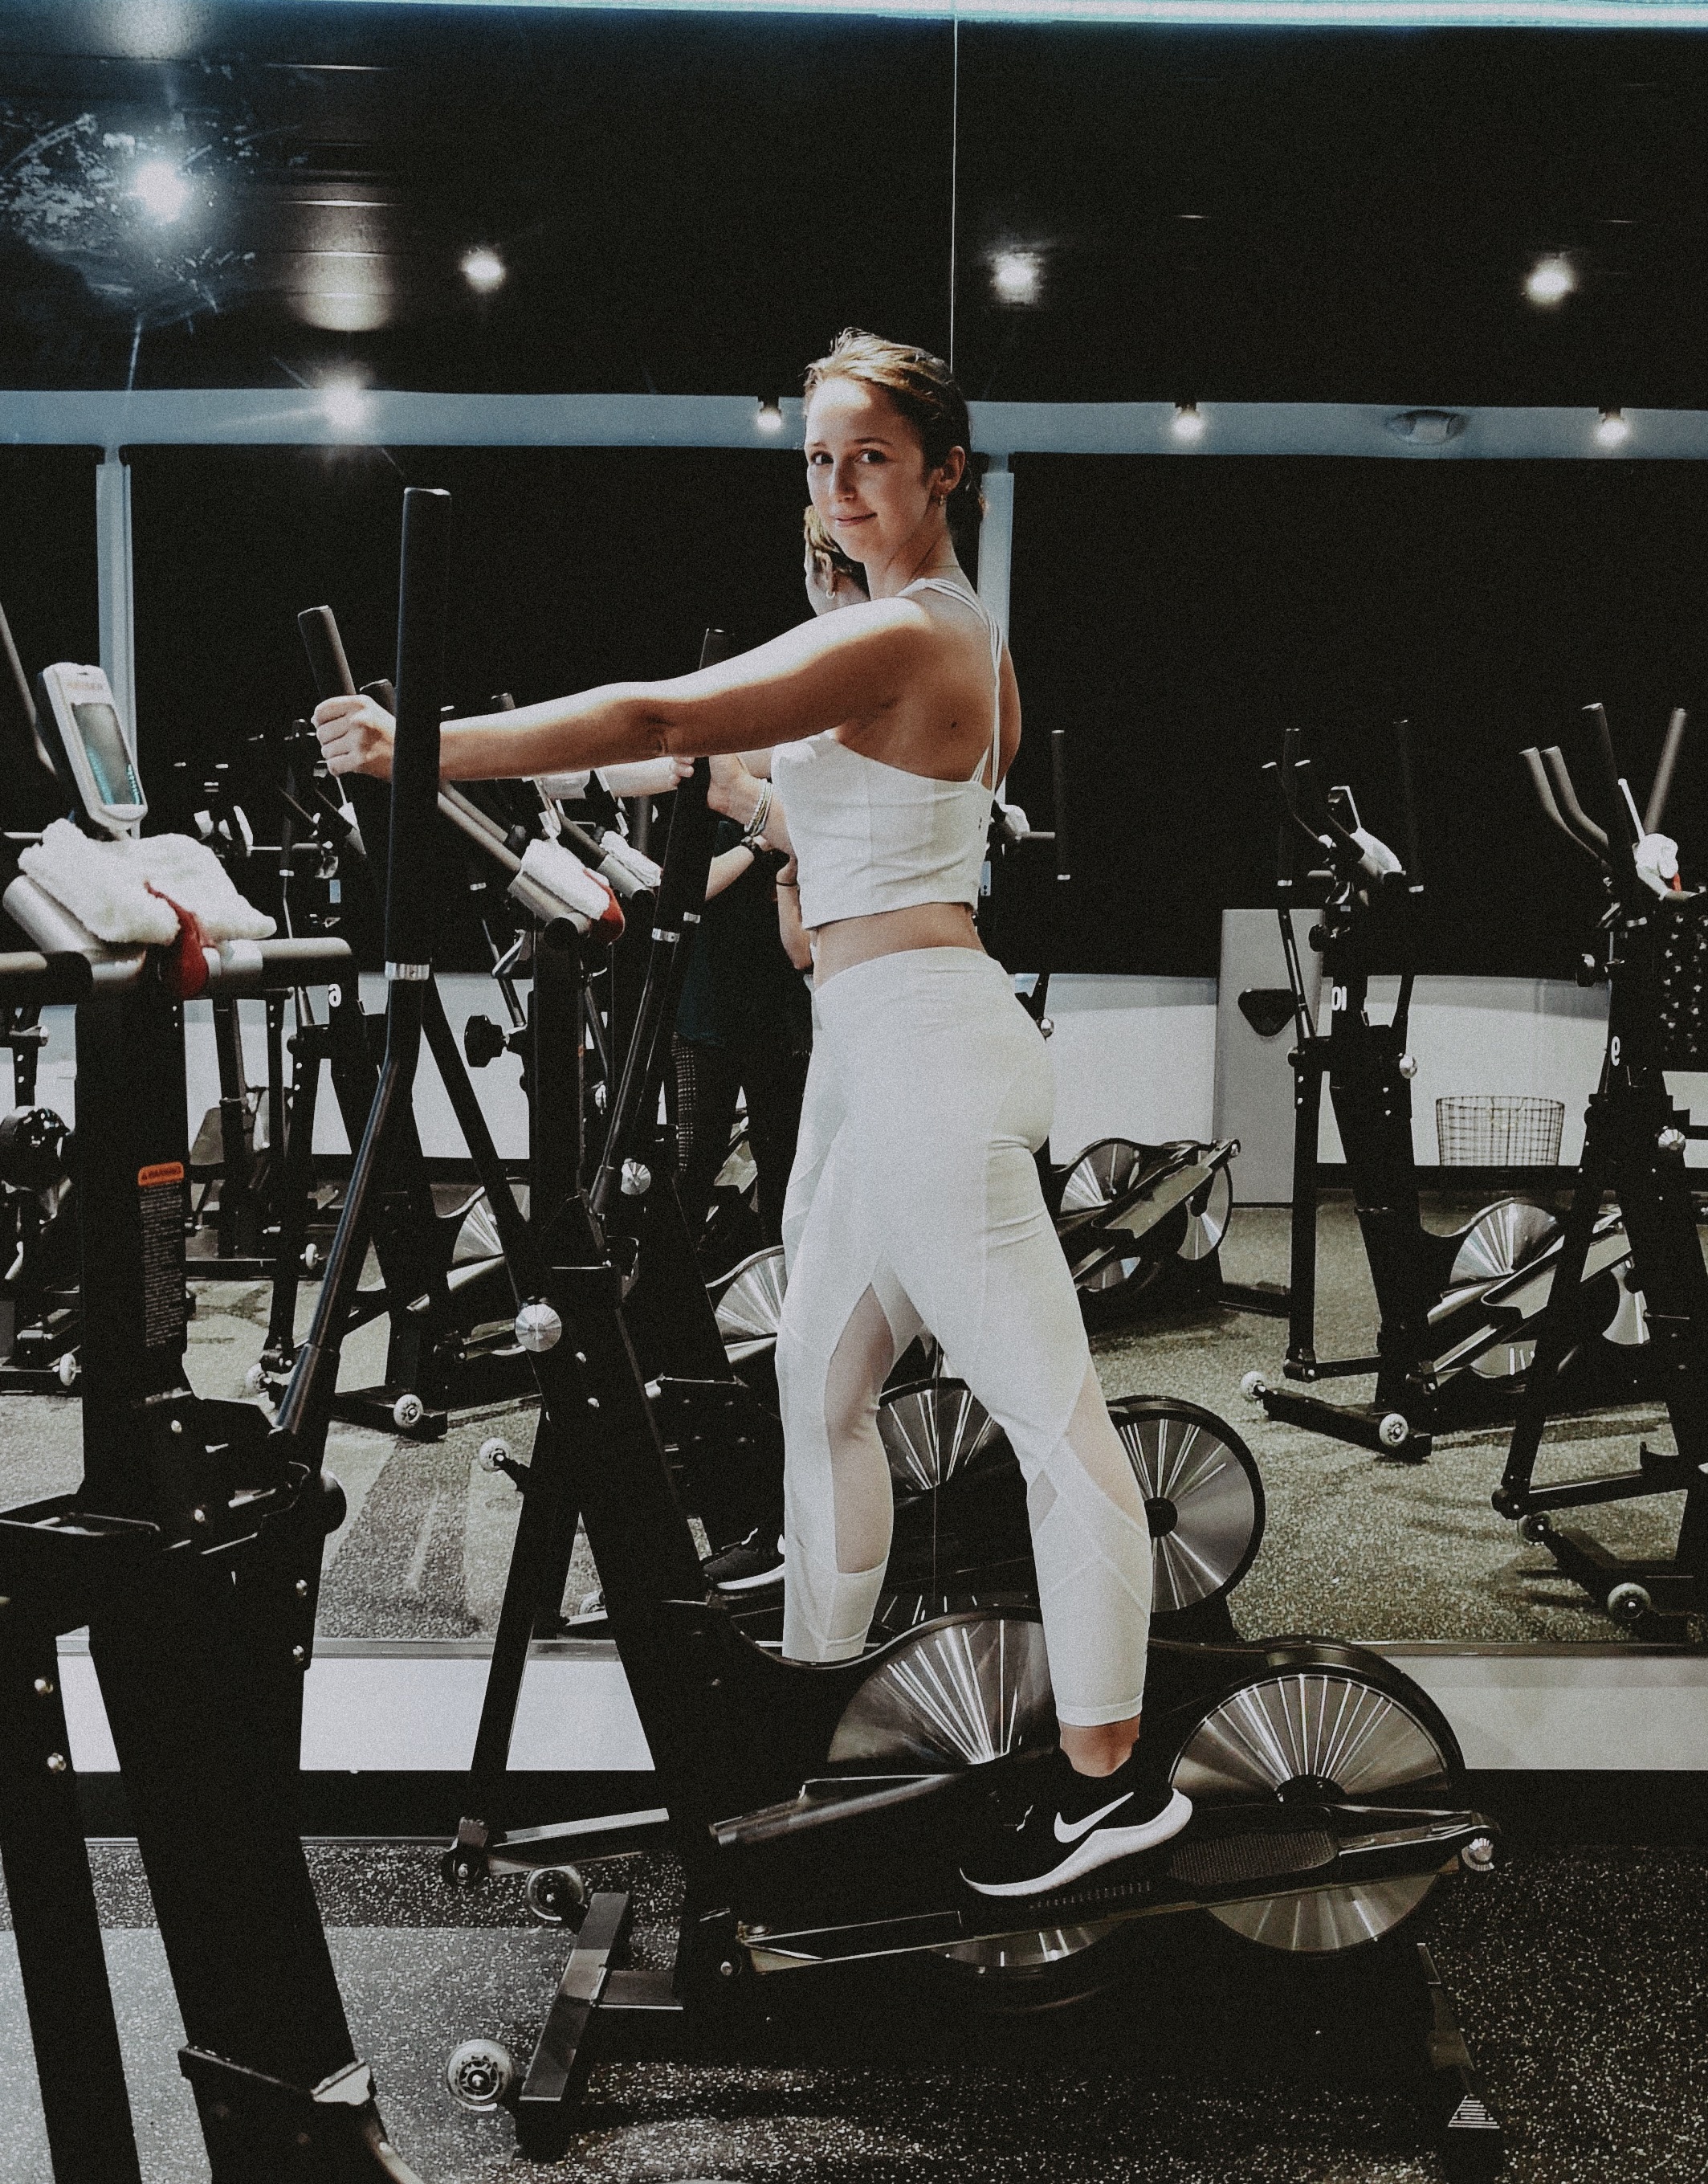 Simone Piliero-Simply by Simone-Club Sweat-Elliptical-Workout-Fitness-Greenwich-Westchester County-Fairfield County-Connecticut #bloggerevents #westchester #newyorkblogger #ctblogger #simplybysimone #sweatybetty #whiteworkoutset #fitness #lifestyle #workoutstyle 